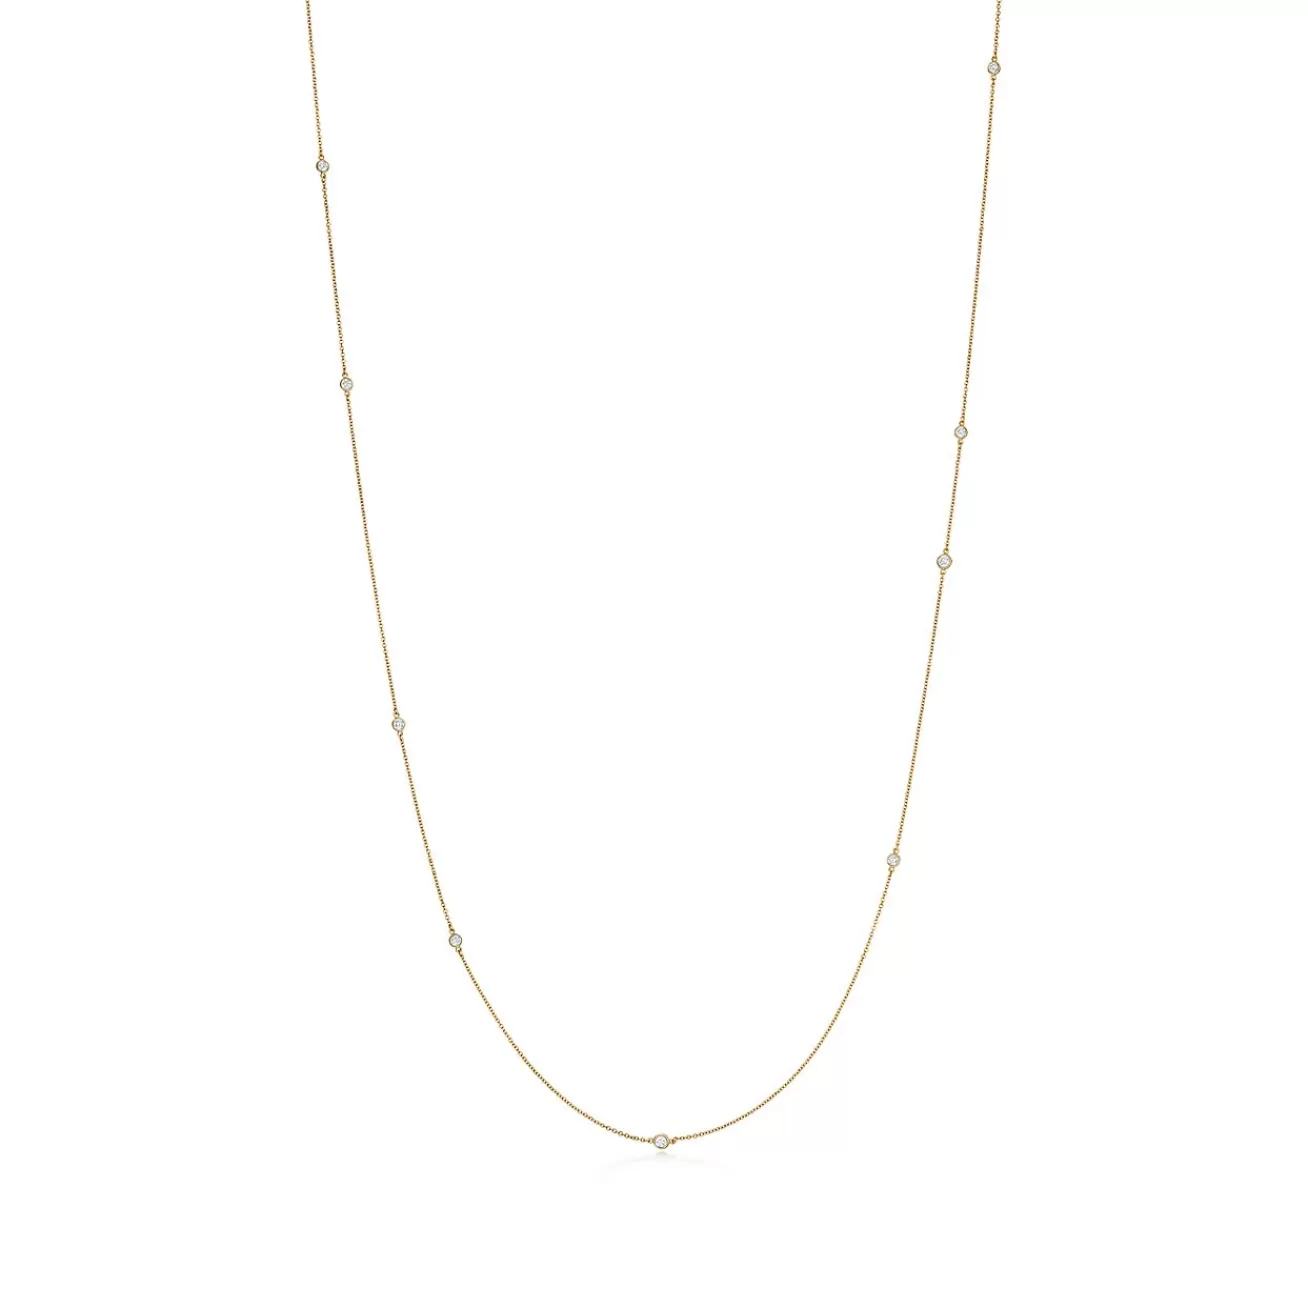 Tiffany & Co. Elsa Peretti® Diamonds by the Yard® sprinkle necklace in 18k gold. | ^ Necklaces & Pendants | Gifts for Her